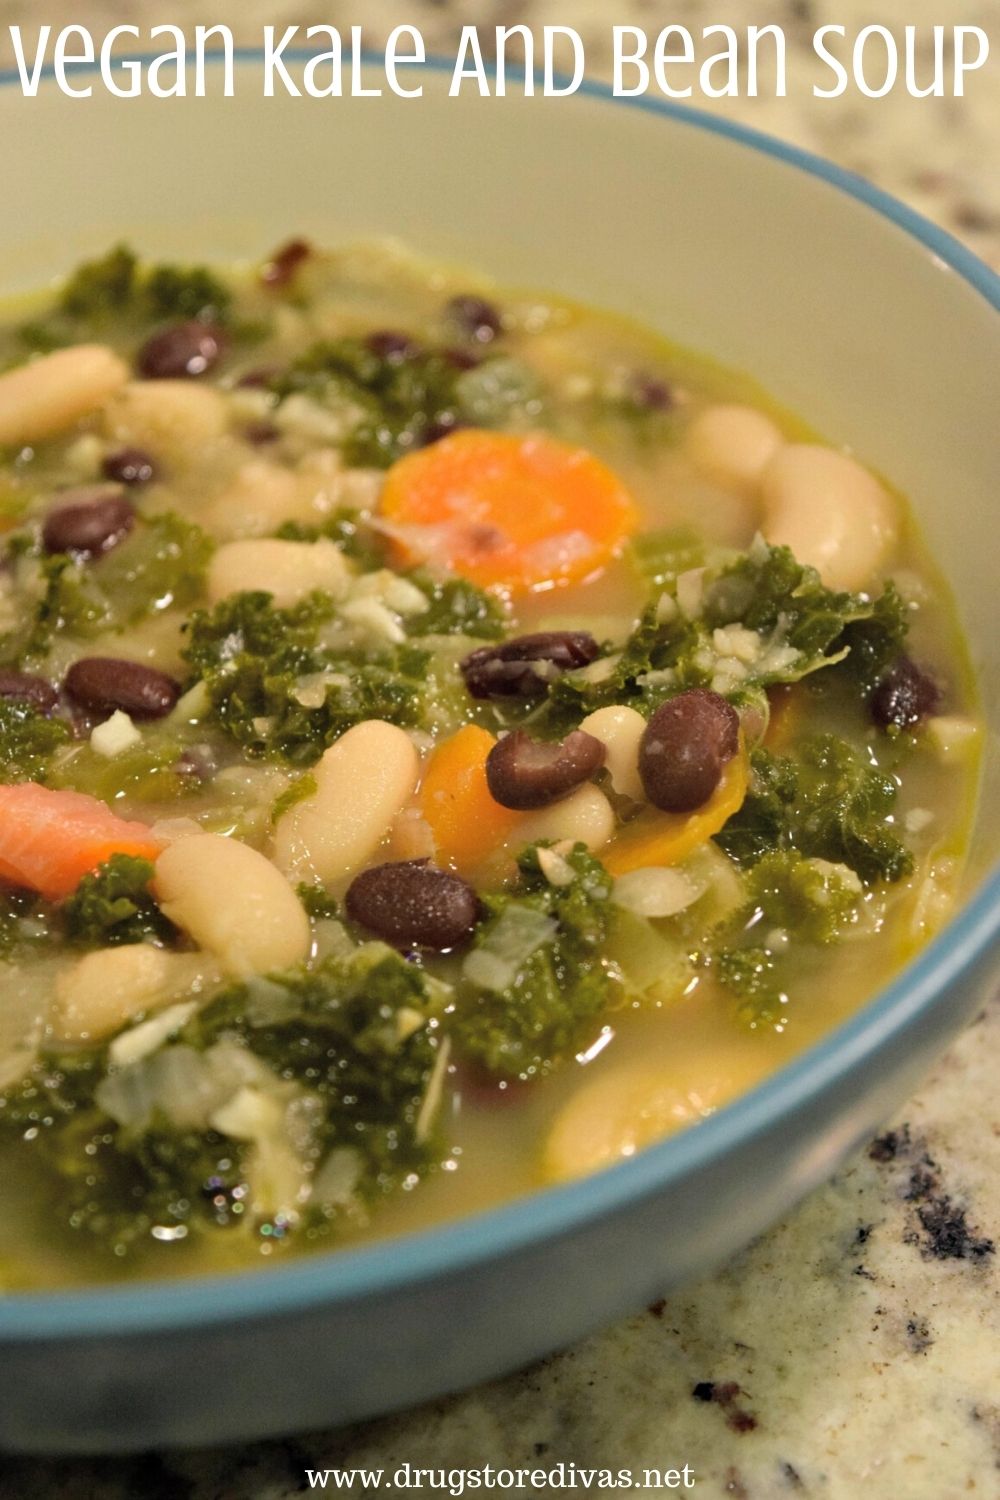 This Kale & Bean Soup will be your new favorite soup. It's super healthy, accidentally vegan, and can be zero points on Weight Watchers. Get the recipe at www.drugstoredivas.net.